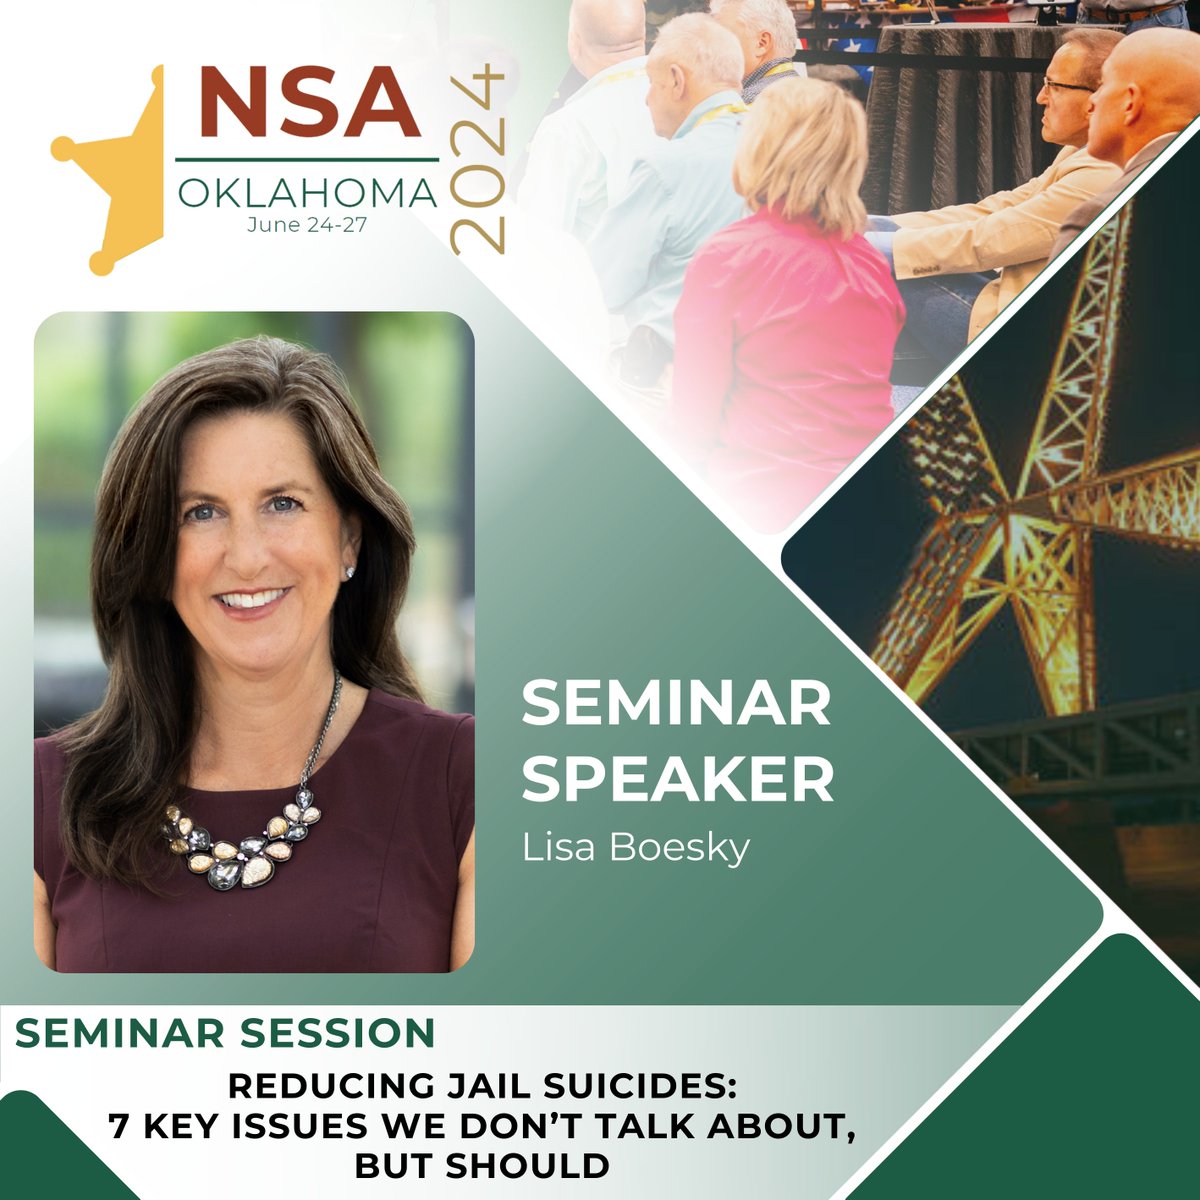 NSA 2024 Annual Conference Speaker Spotlight! #Sheriffs2024 We're thrilled to spotlight Lisa Boesky, National Jail Suicide Expert at Jail Suicide Experts Services. Despite the use of multiple strategies to screen, assess, monitor, house, and safely clothe suicidal individuals,